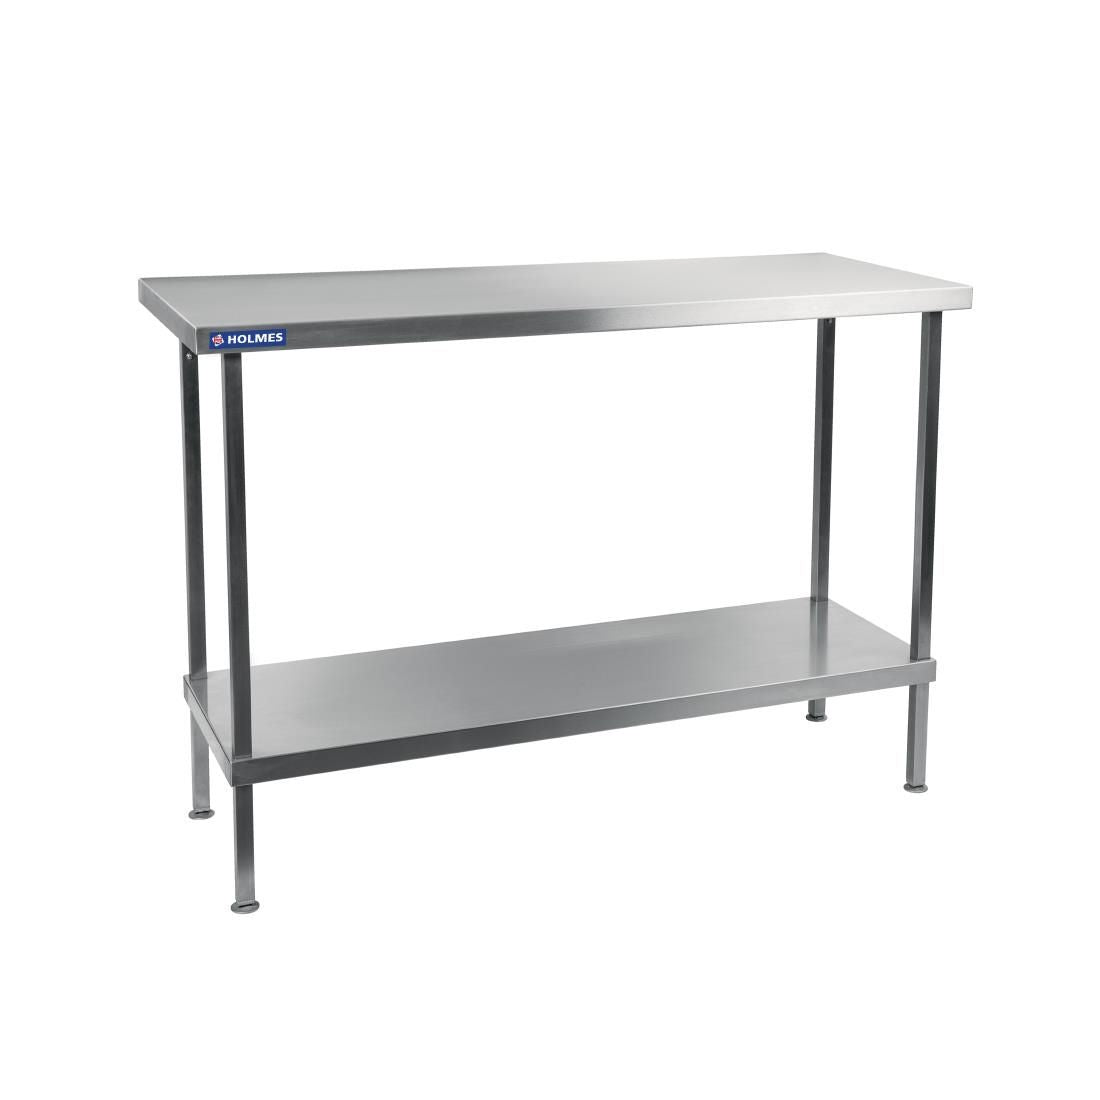 Holmes Stainless Steel Centre Table 2100mm - DR053